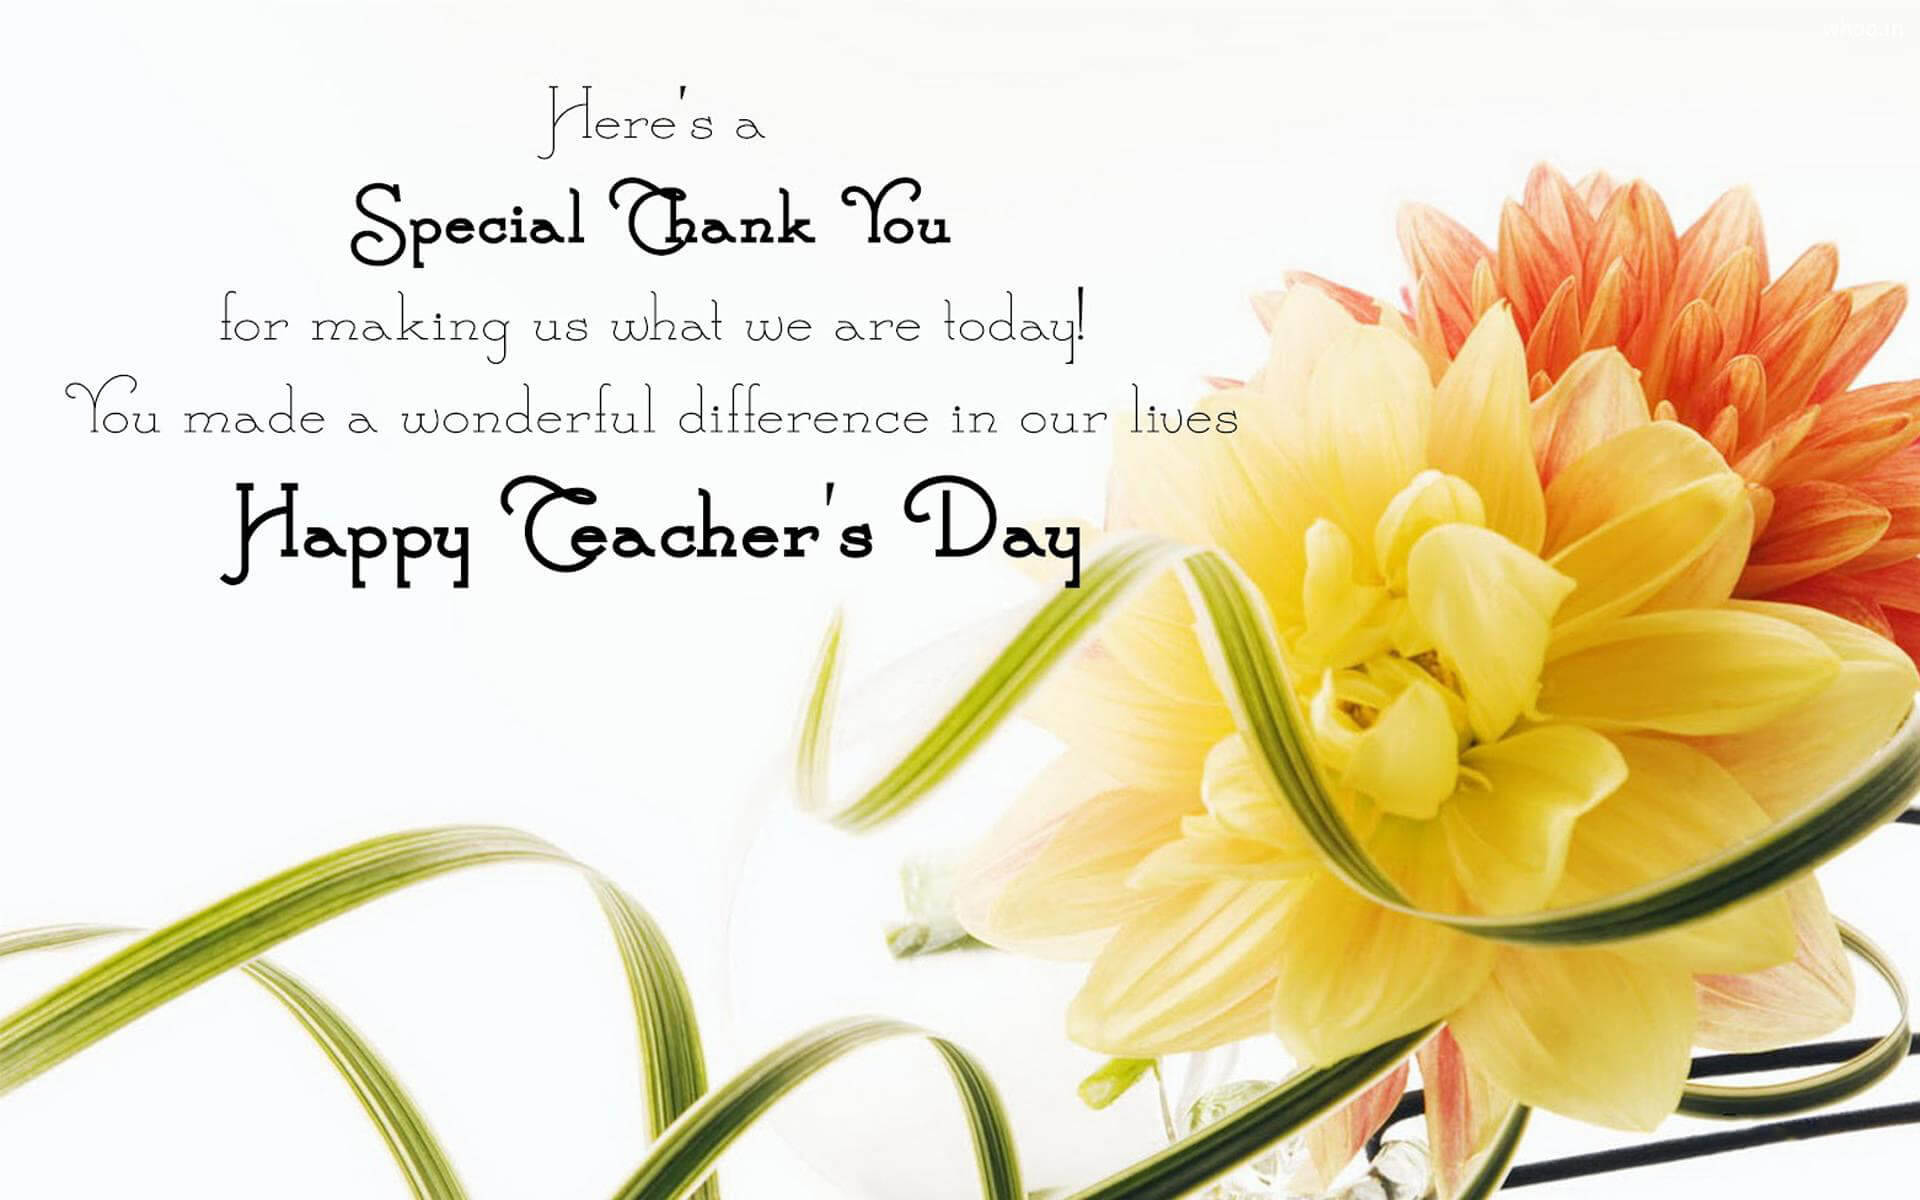 Happy Teachers' Day Special Thank You